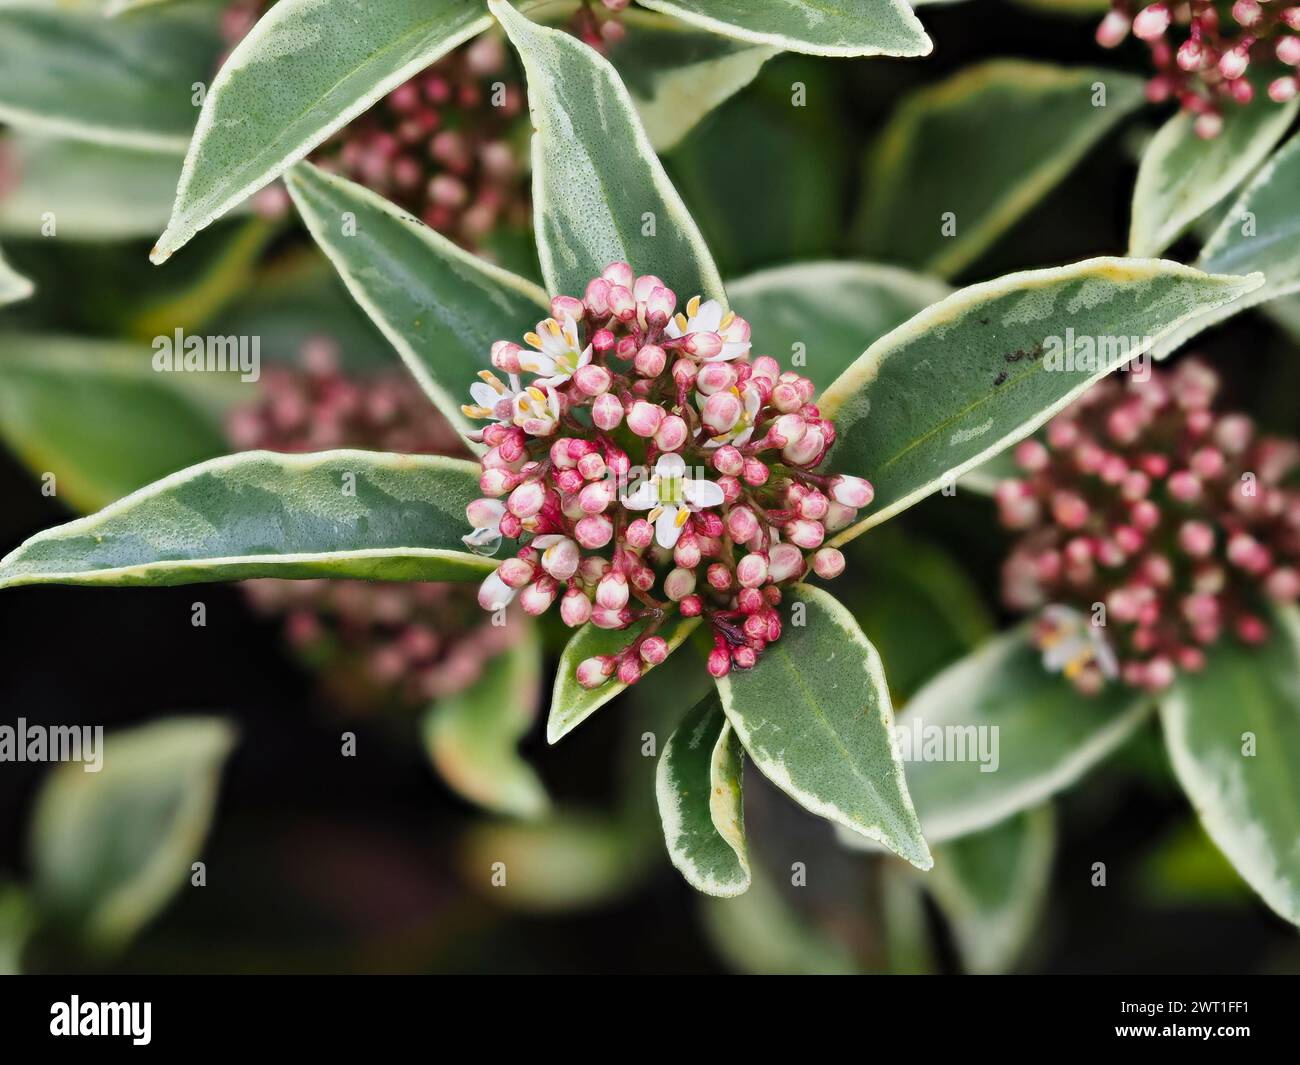 Scented male spring flowers in the panicles of the compact, variegated evergreen shrub, Skimmia japonica 'Magic Marlot' Stock Photo